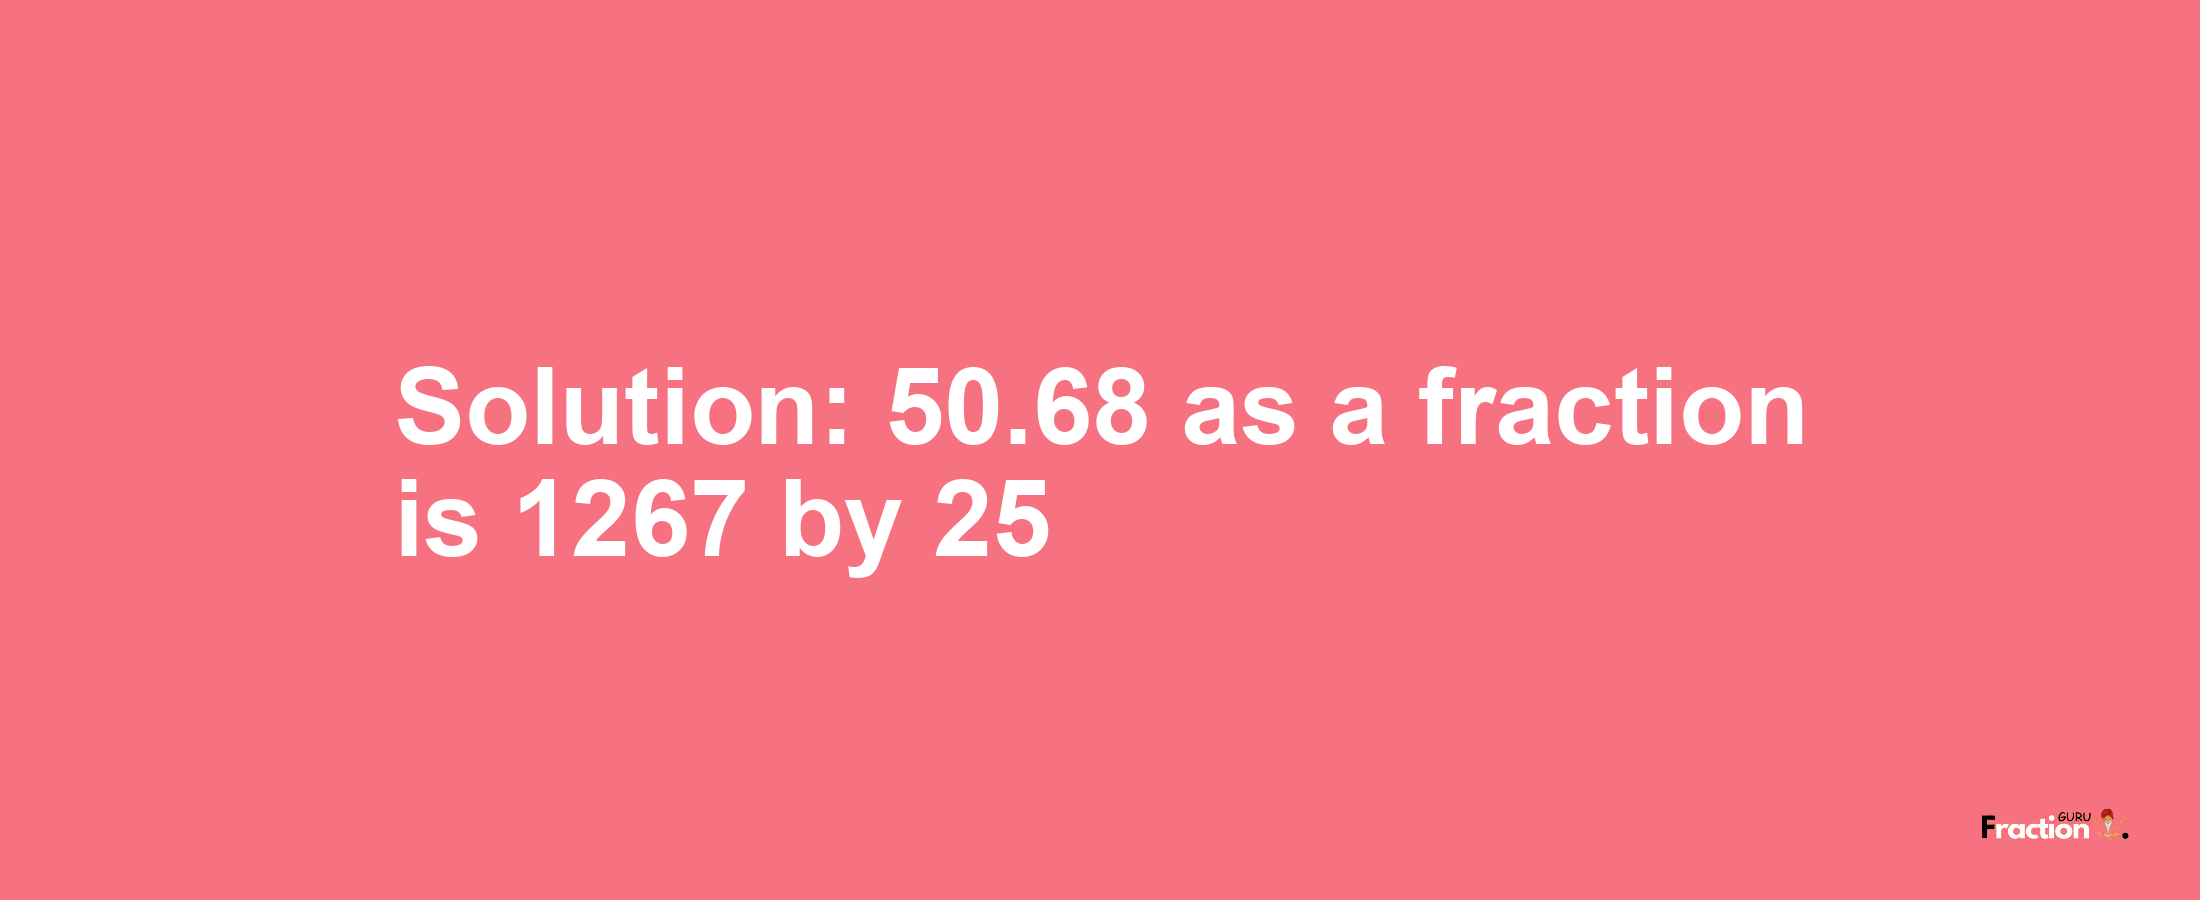 Solution:50.68 as a fraction is 1267/25